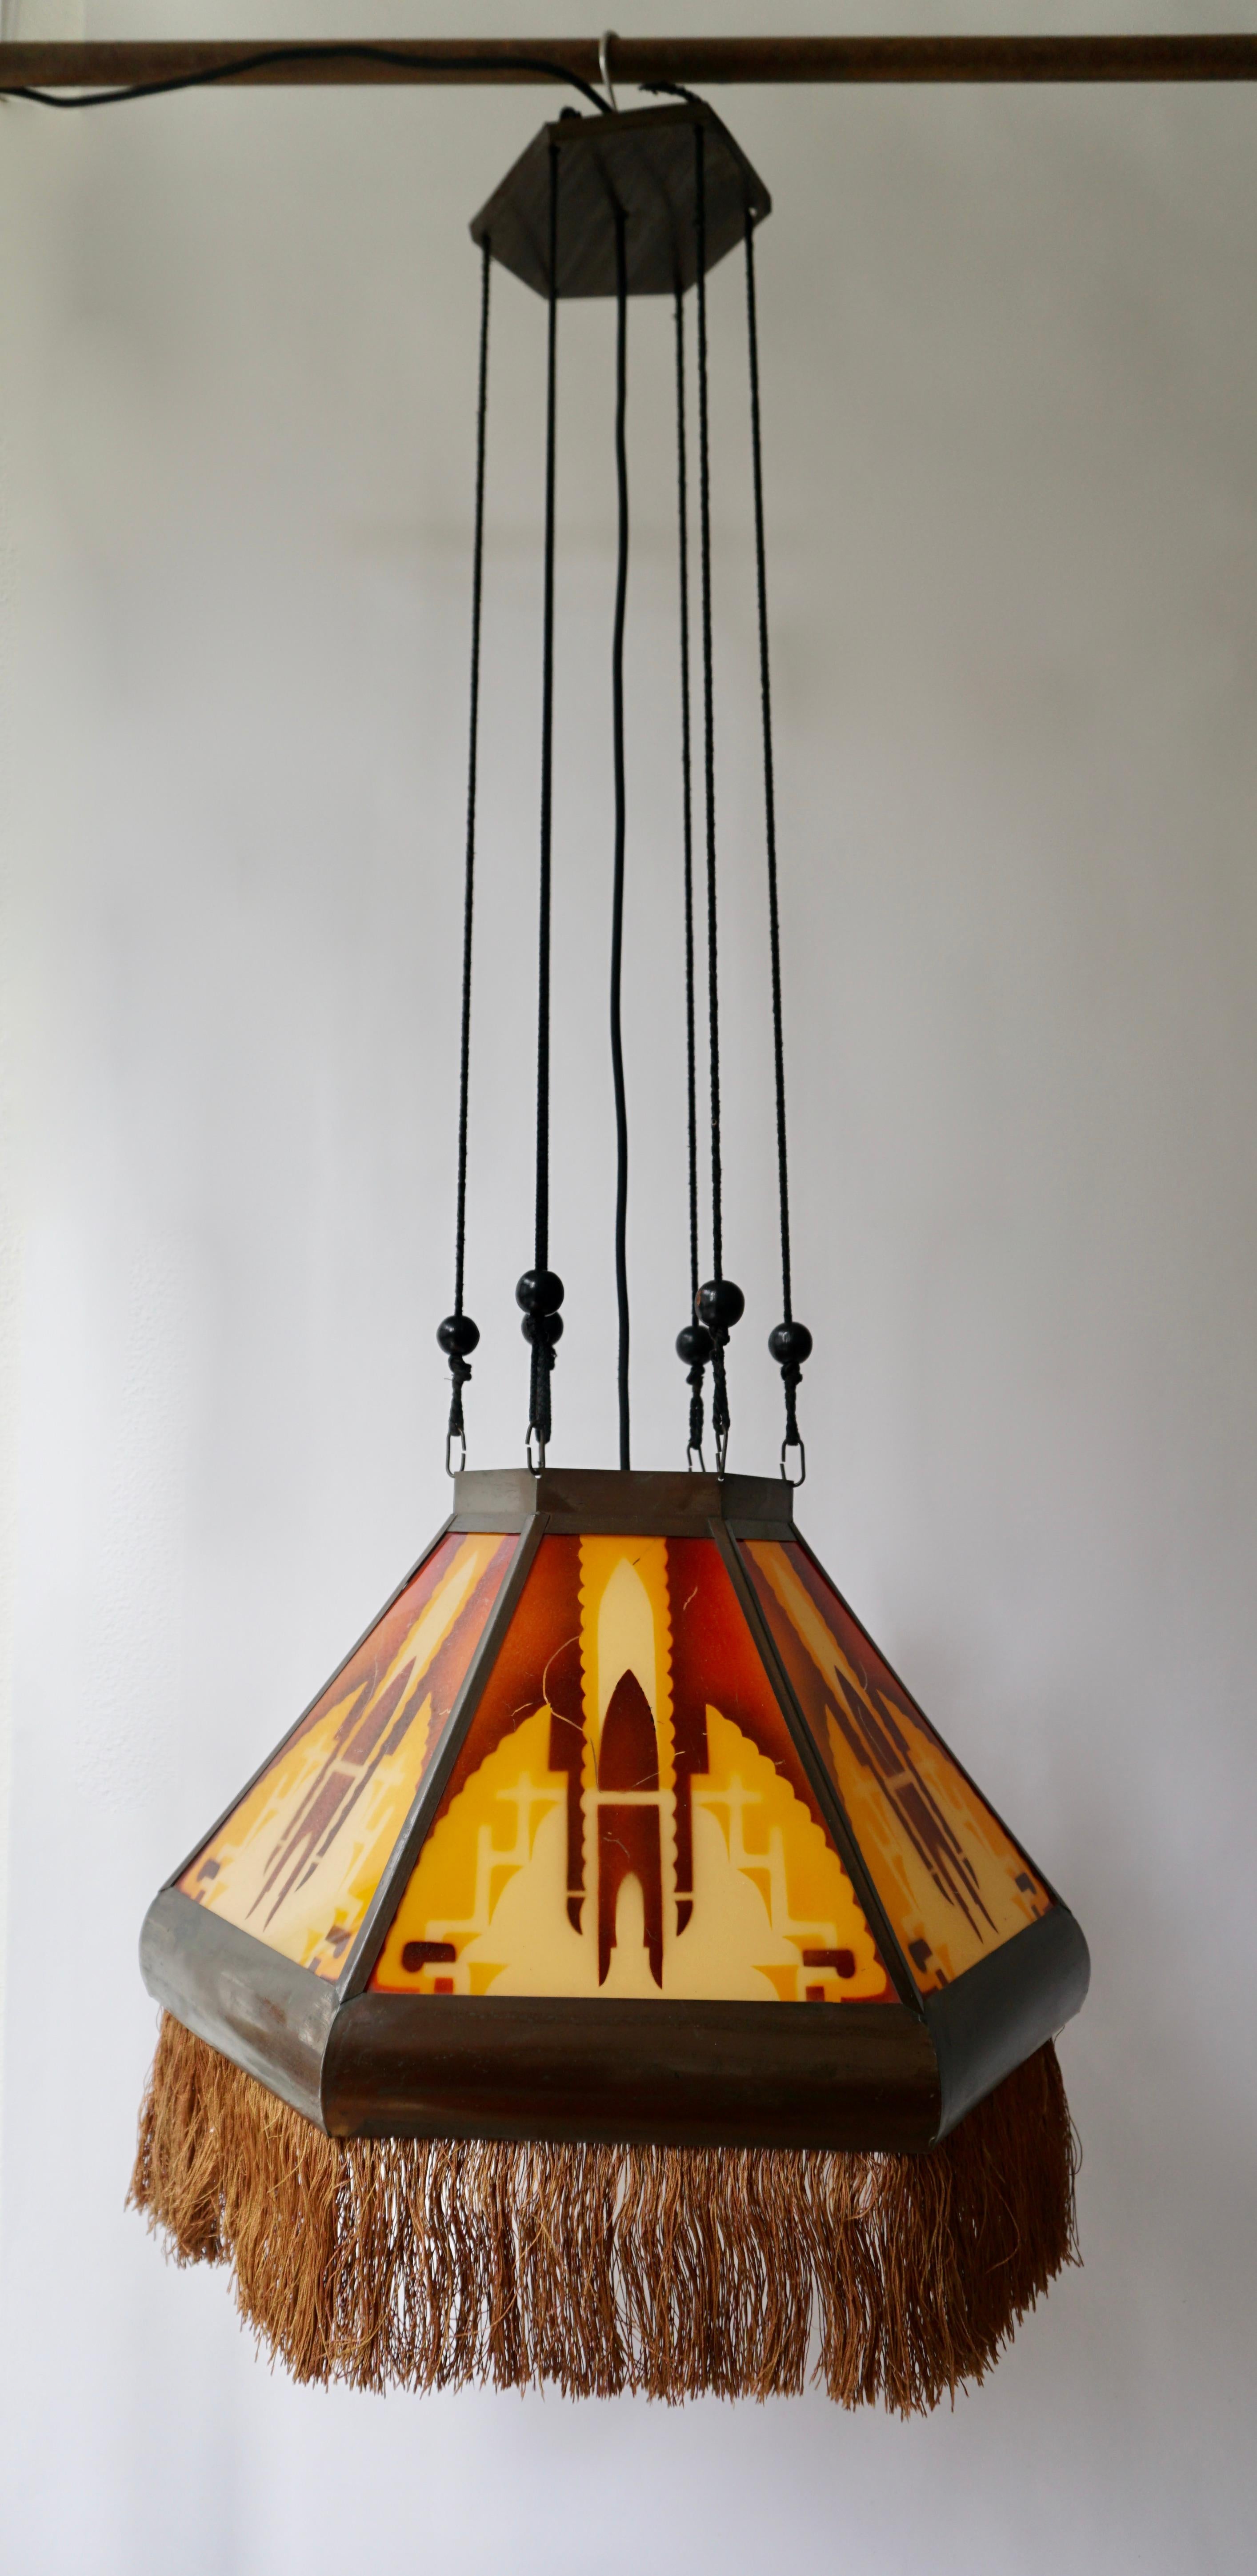 ‘Amsterdamse School’ glass Art Deco pedant light, manufactured in the 1920s in the Netherlands. Very subtle Dutch design pendant in hexagon shape featuring 6 glass panels and beautiful colored glasses in a brass armature, with an orange-colored